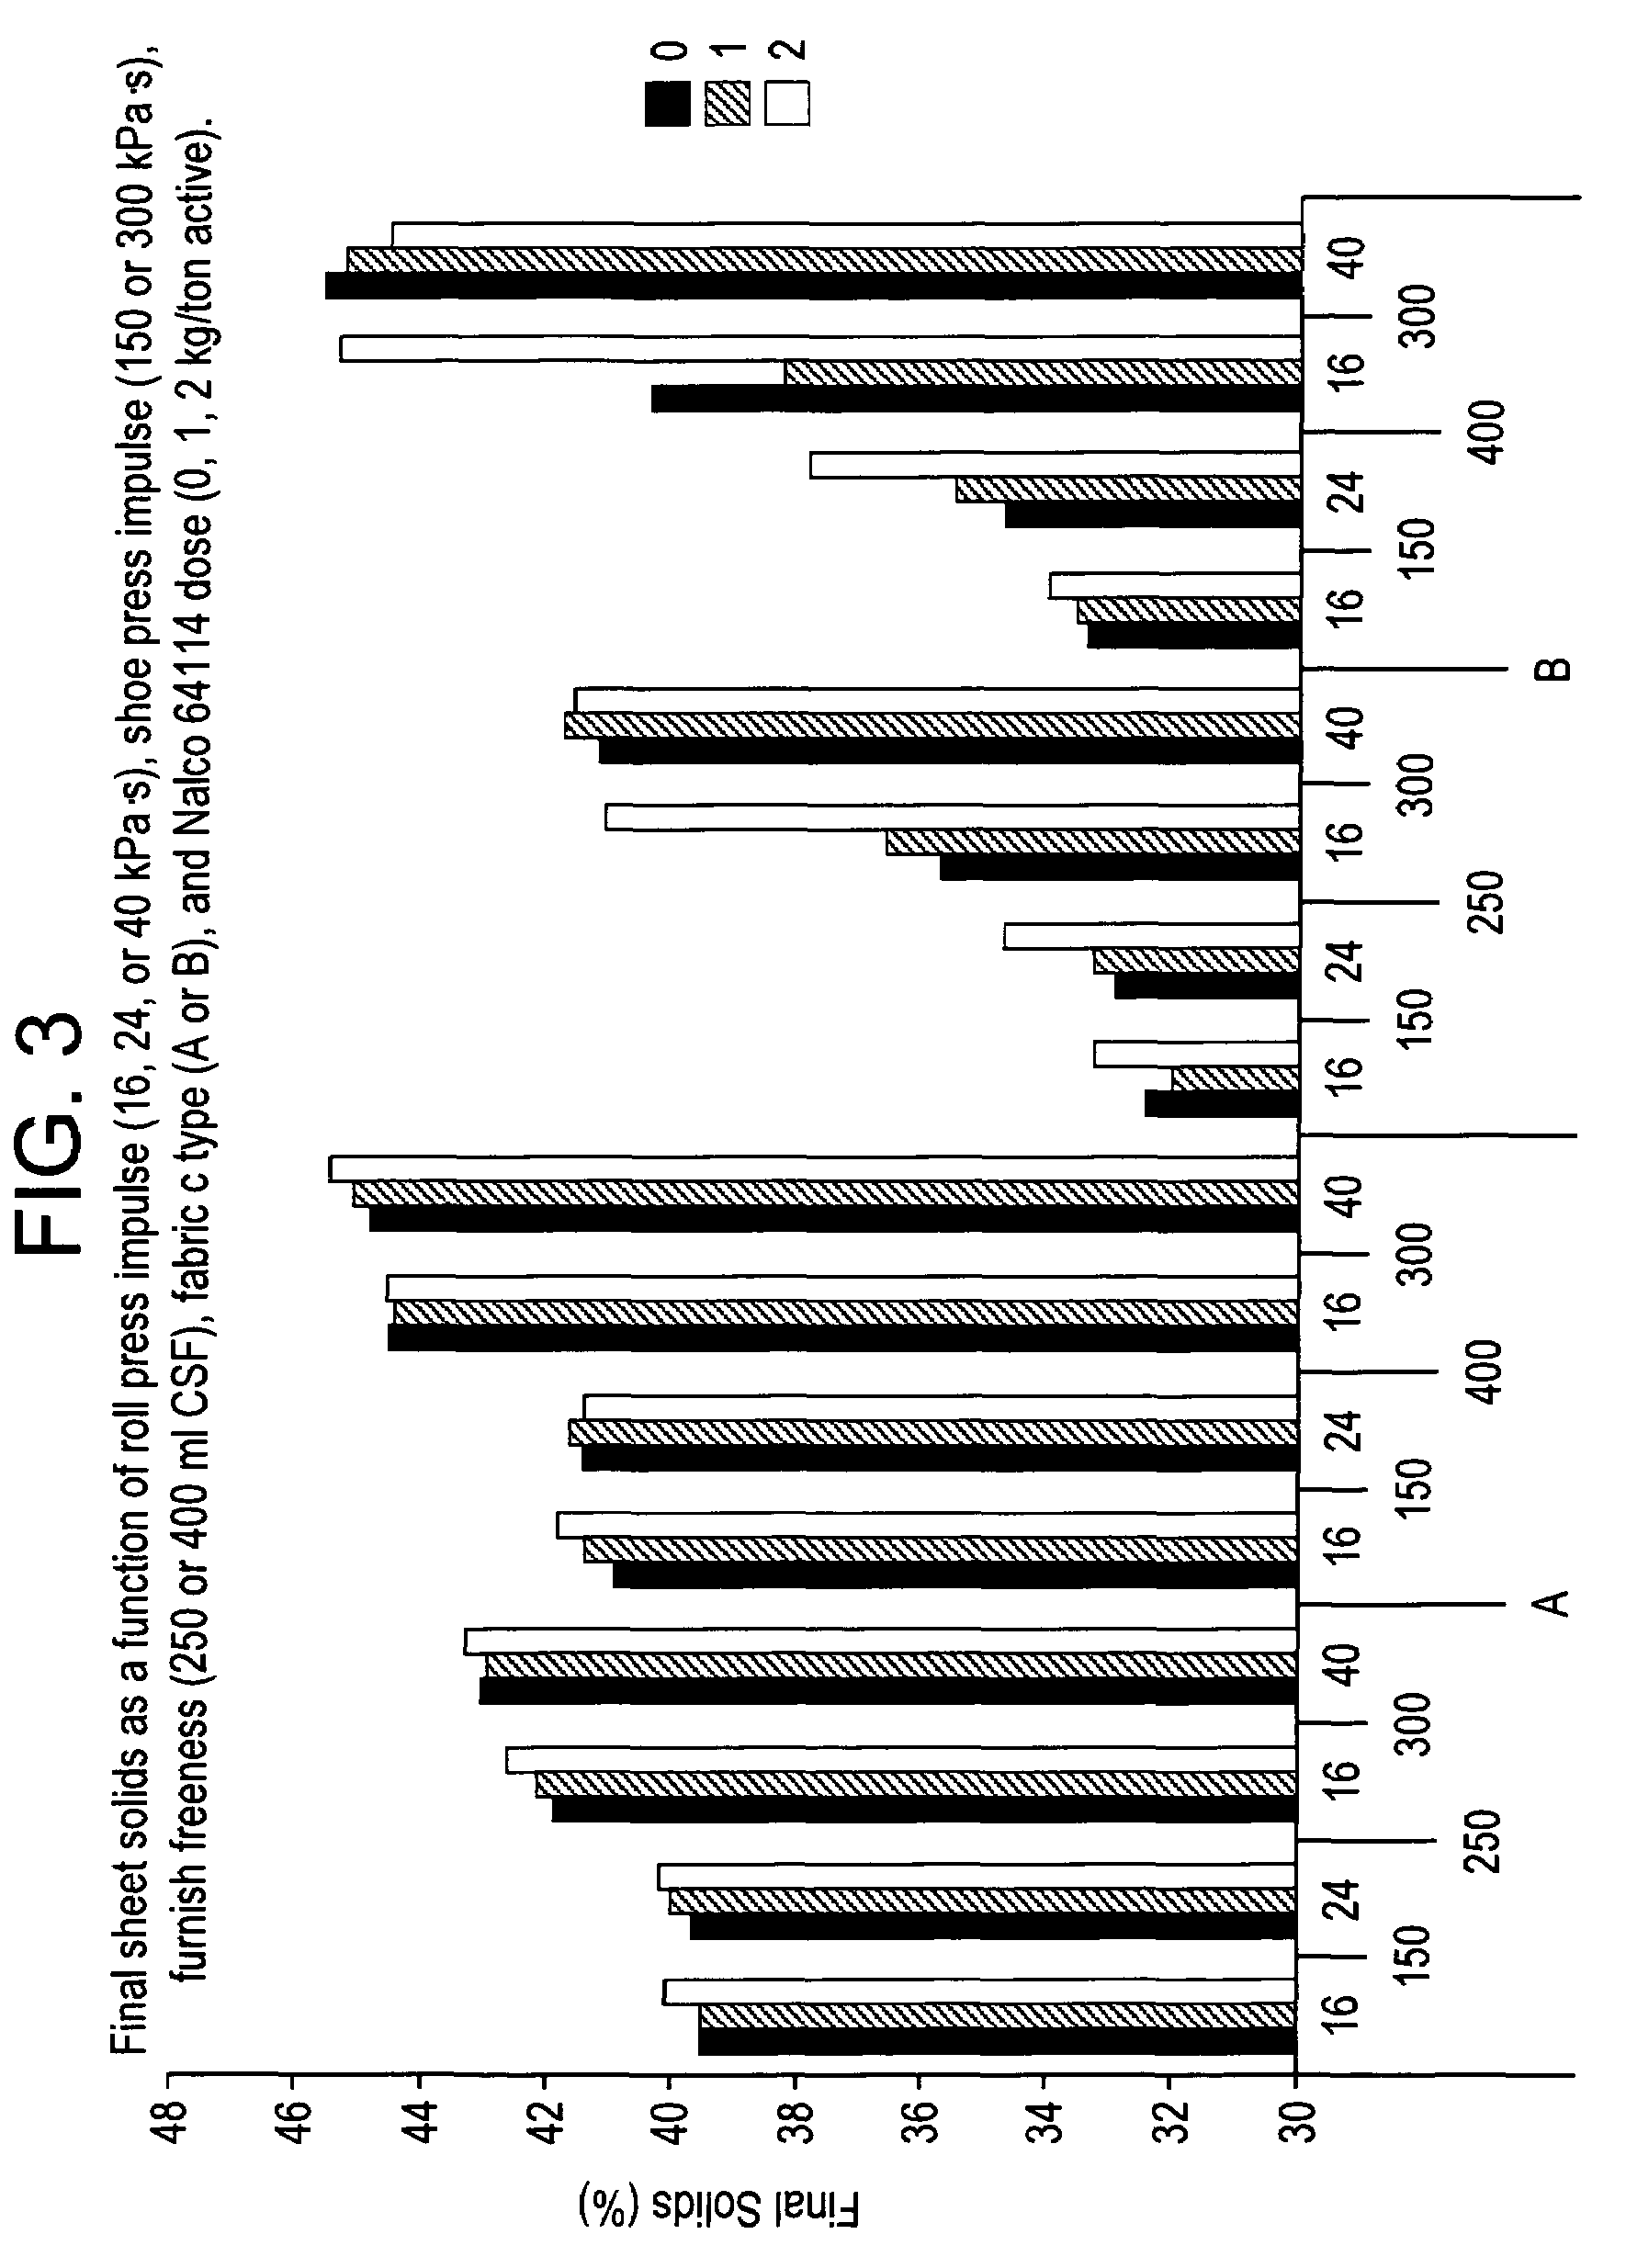 Method of operating a papermaking process